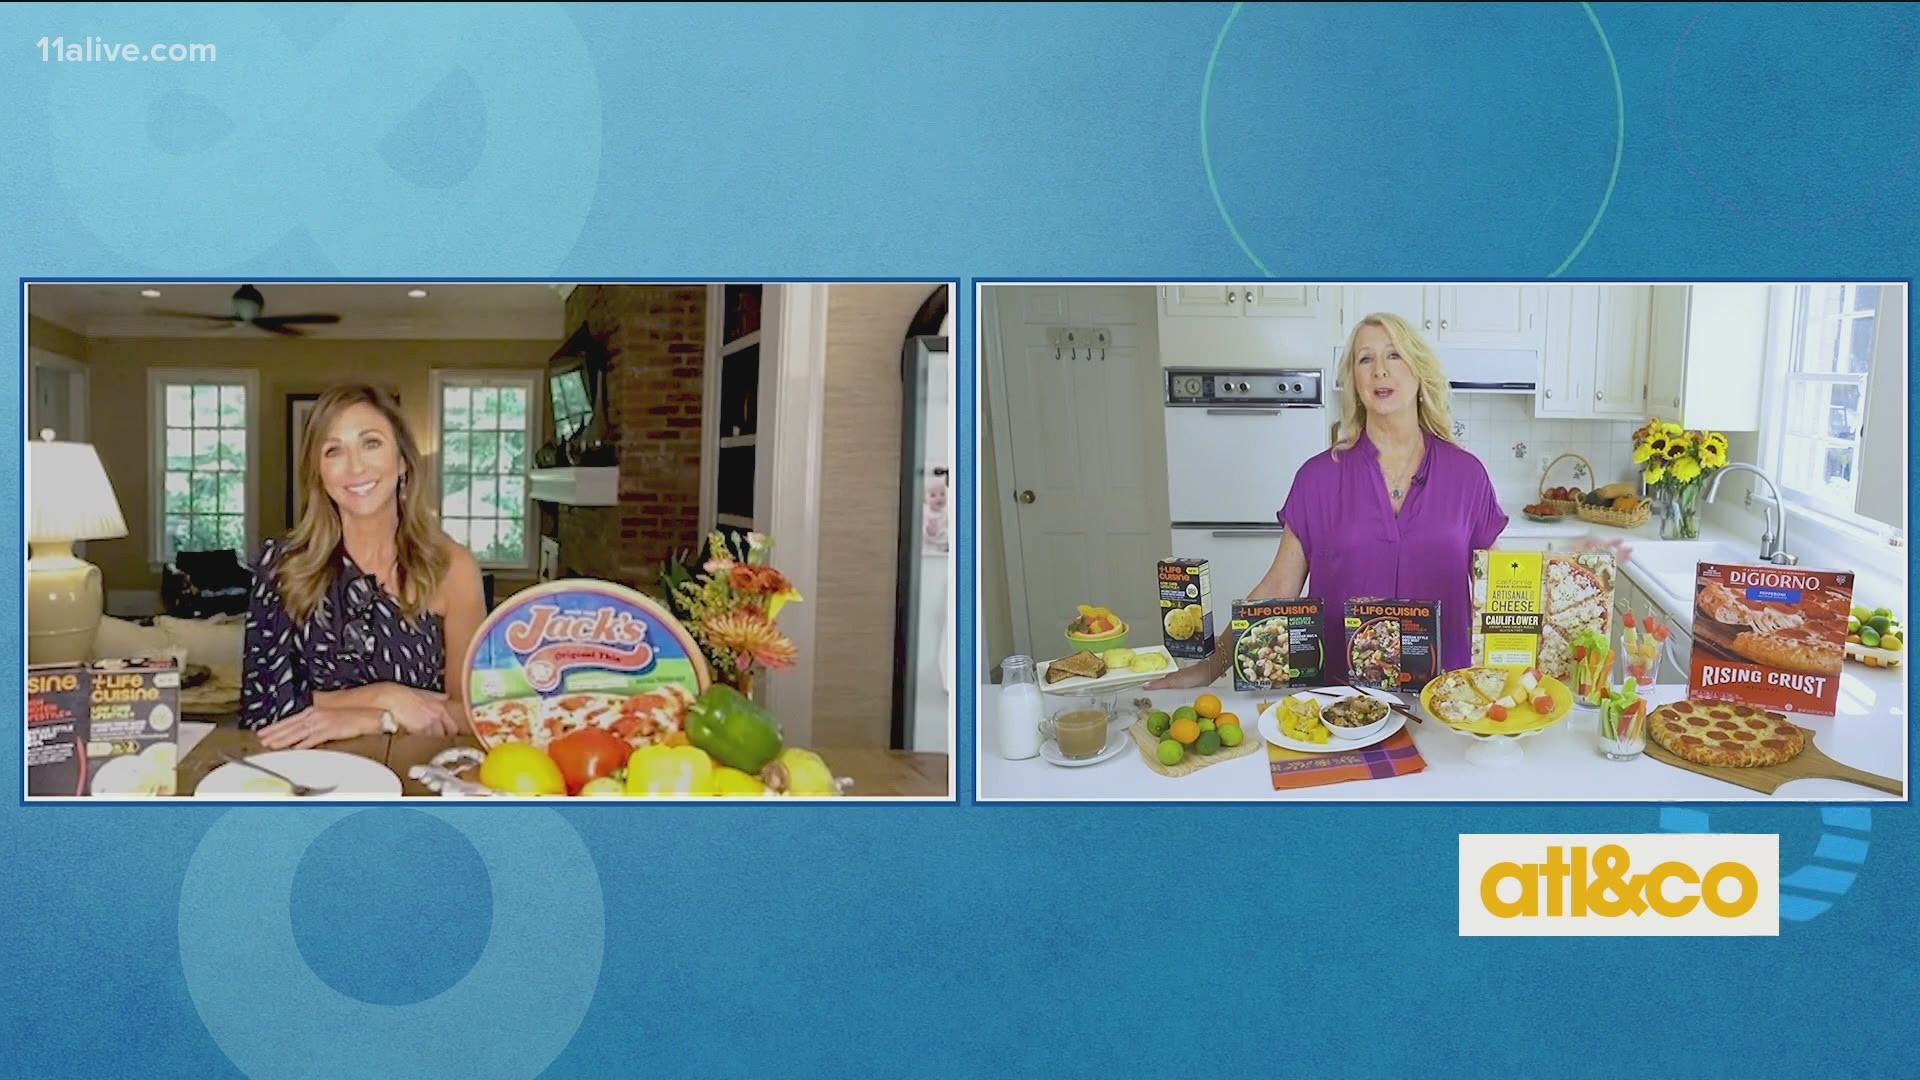 Registered dietitian Carolyn O'Neil shares delicious shortcuts for the dinner table the whole family will enjoy.